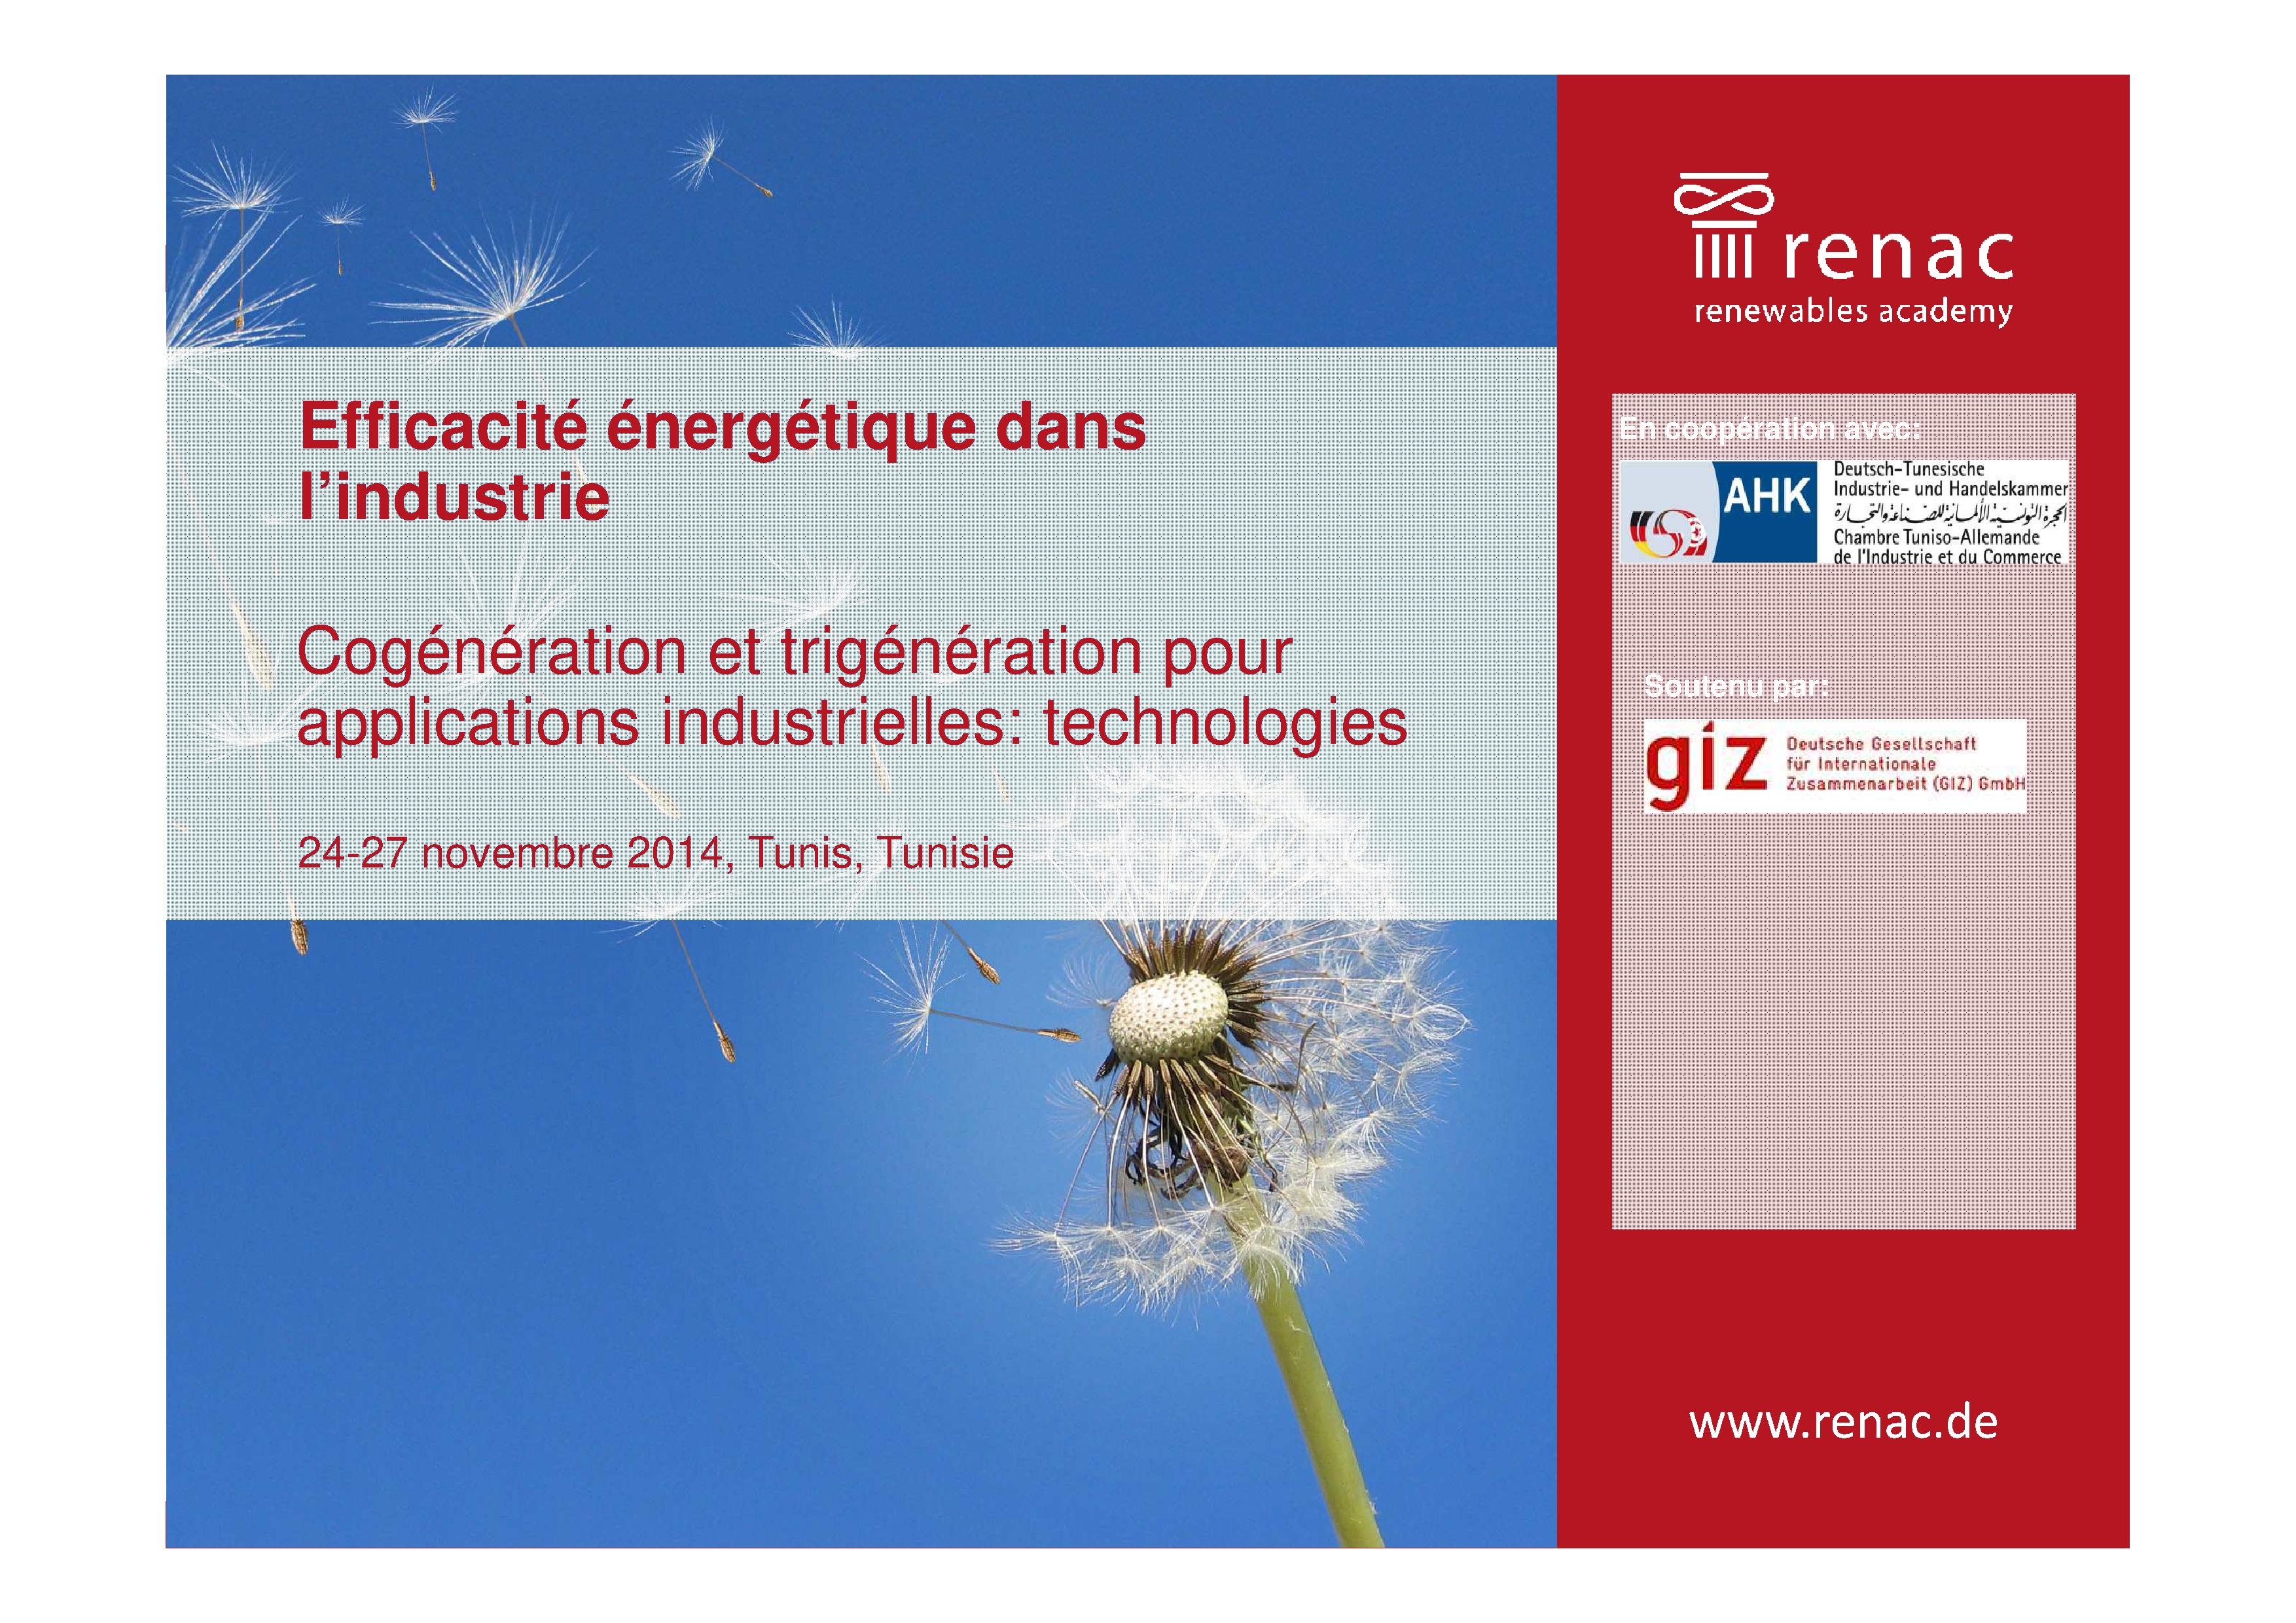 (9) Cogeneration and trigeneration for industrial applications: technologies